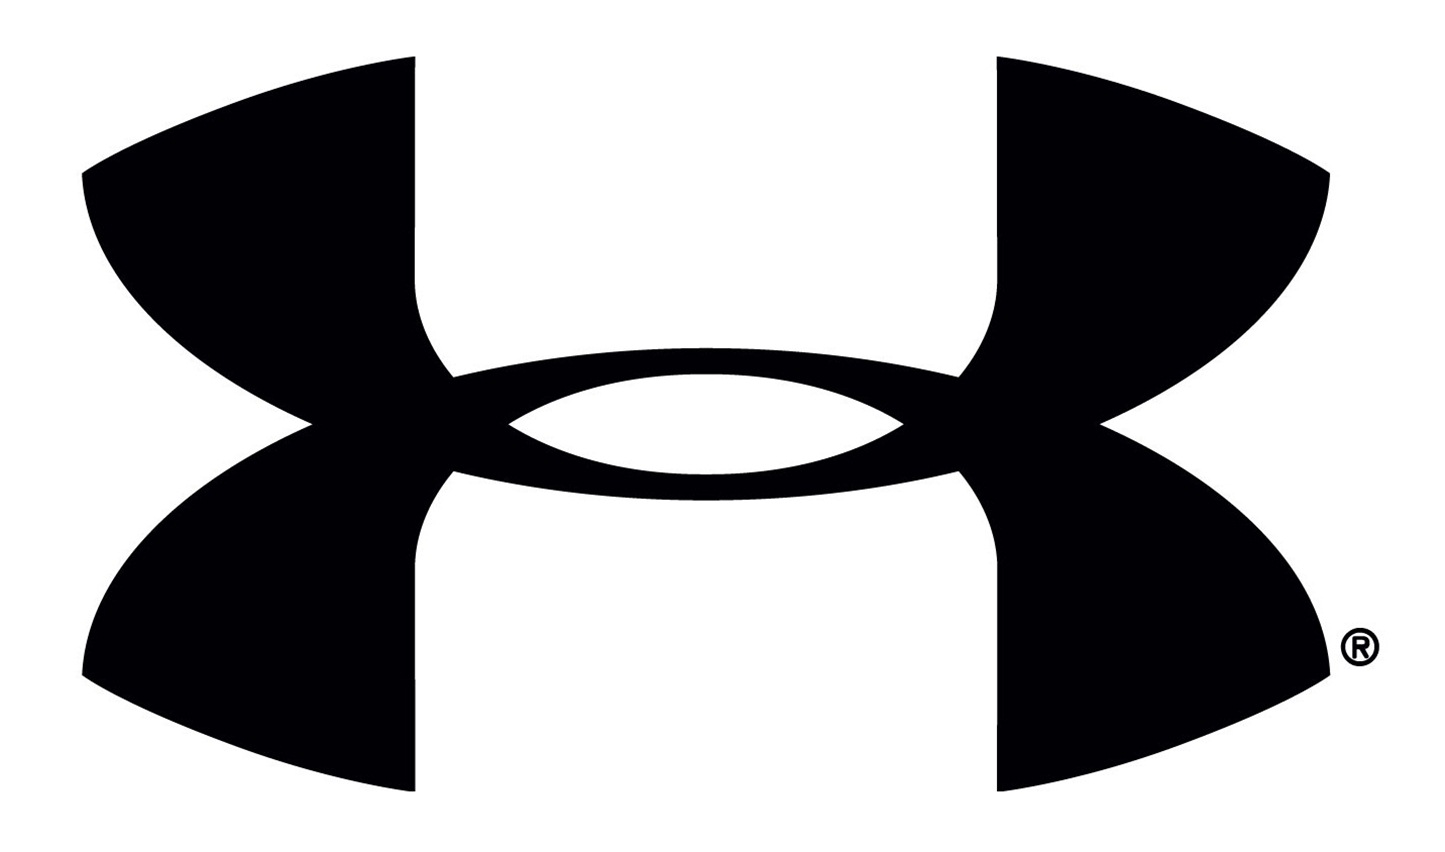 Under Armour Logo Wallpaper 5695 Hd Wallpapers in Logos   Imagescicom 1445x852